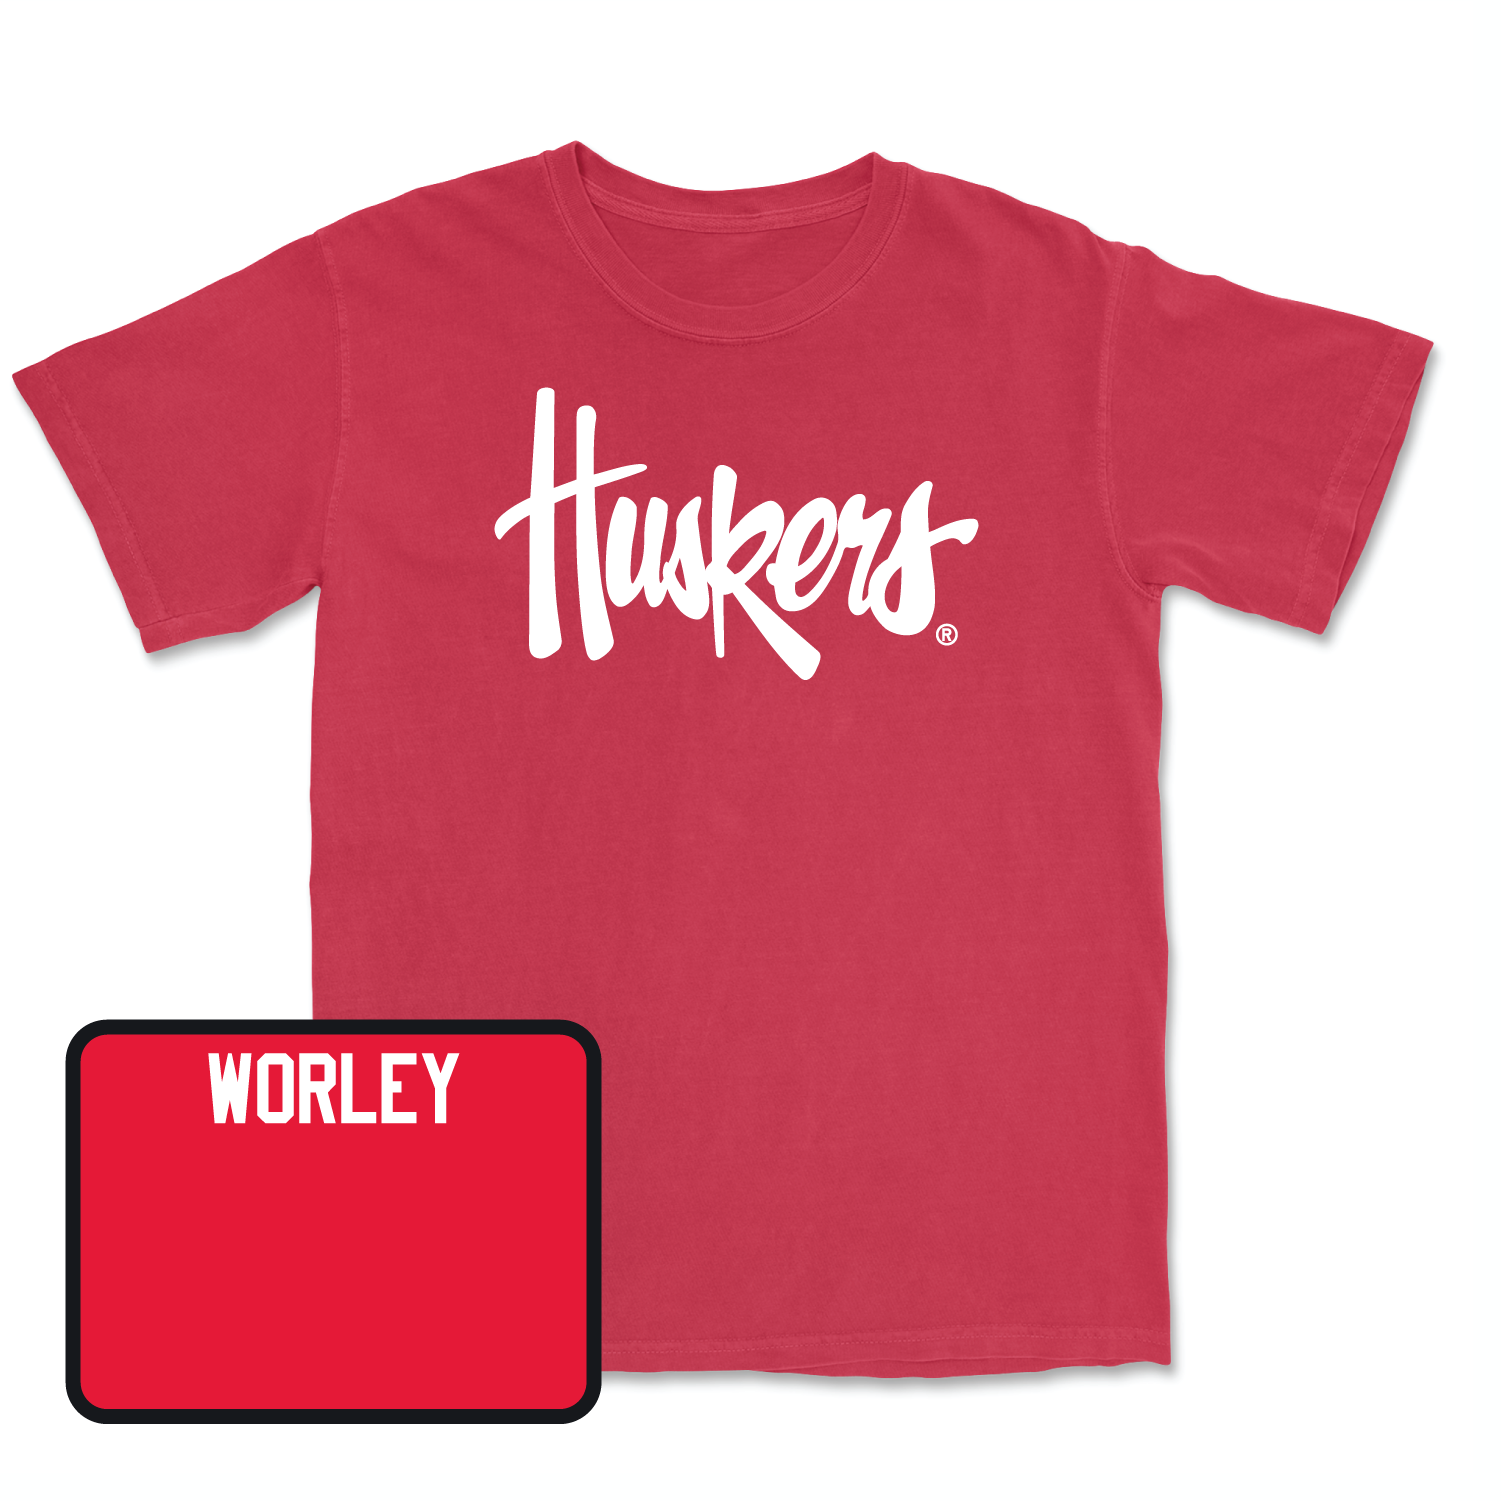 Red Women's Gymnastics Huskers Tee 2X-Large / Annie Worley